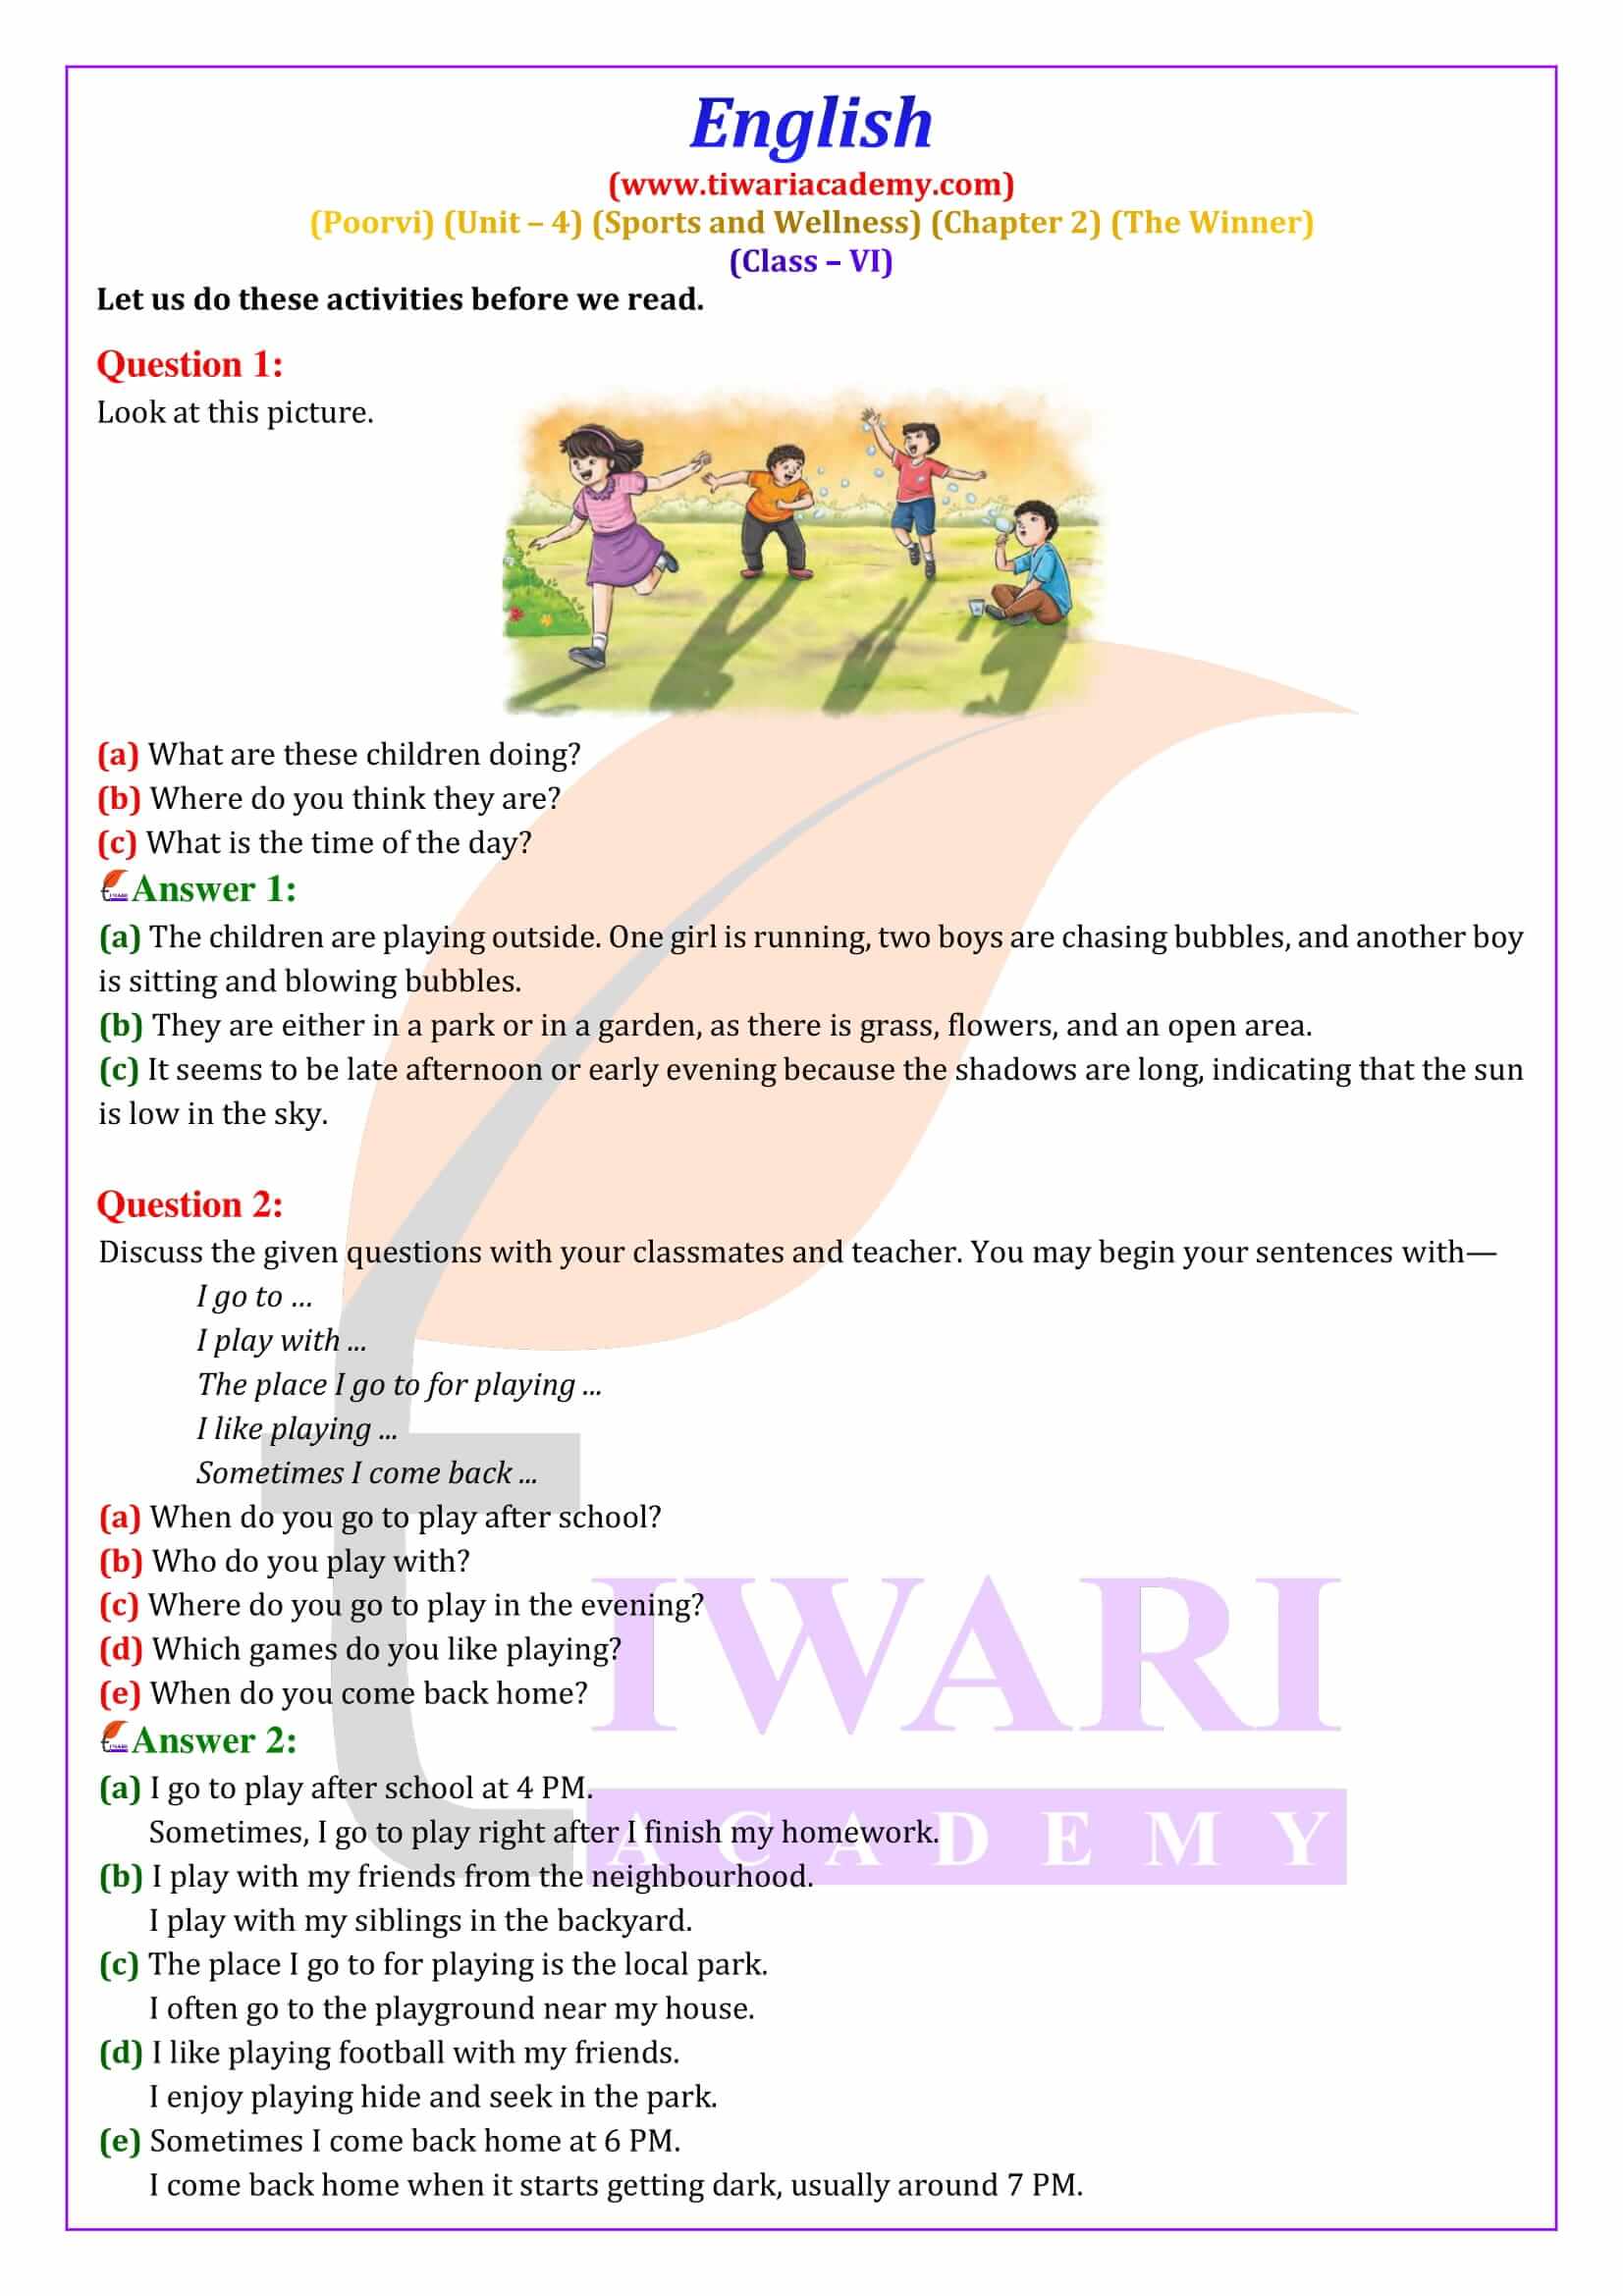 NCERT Solutions for Class 6 English Poorvi Unit 4 Sports and Wellness Chapter 2 The Winner